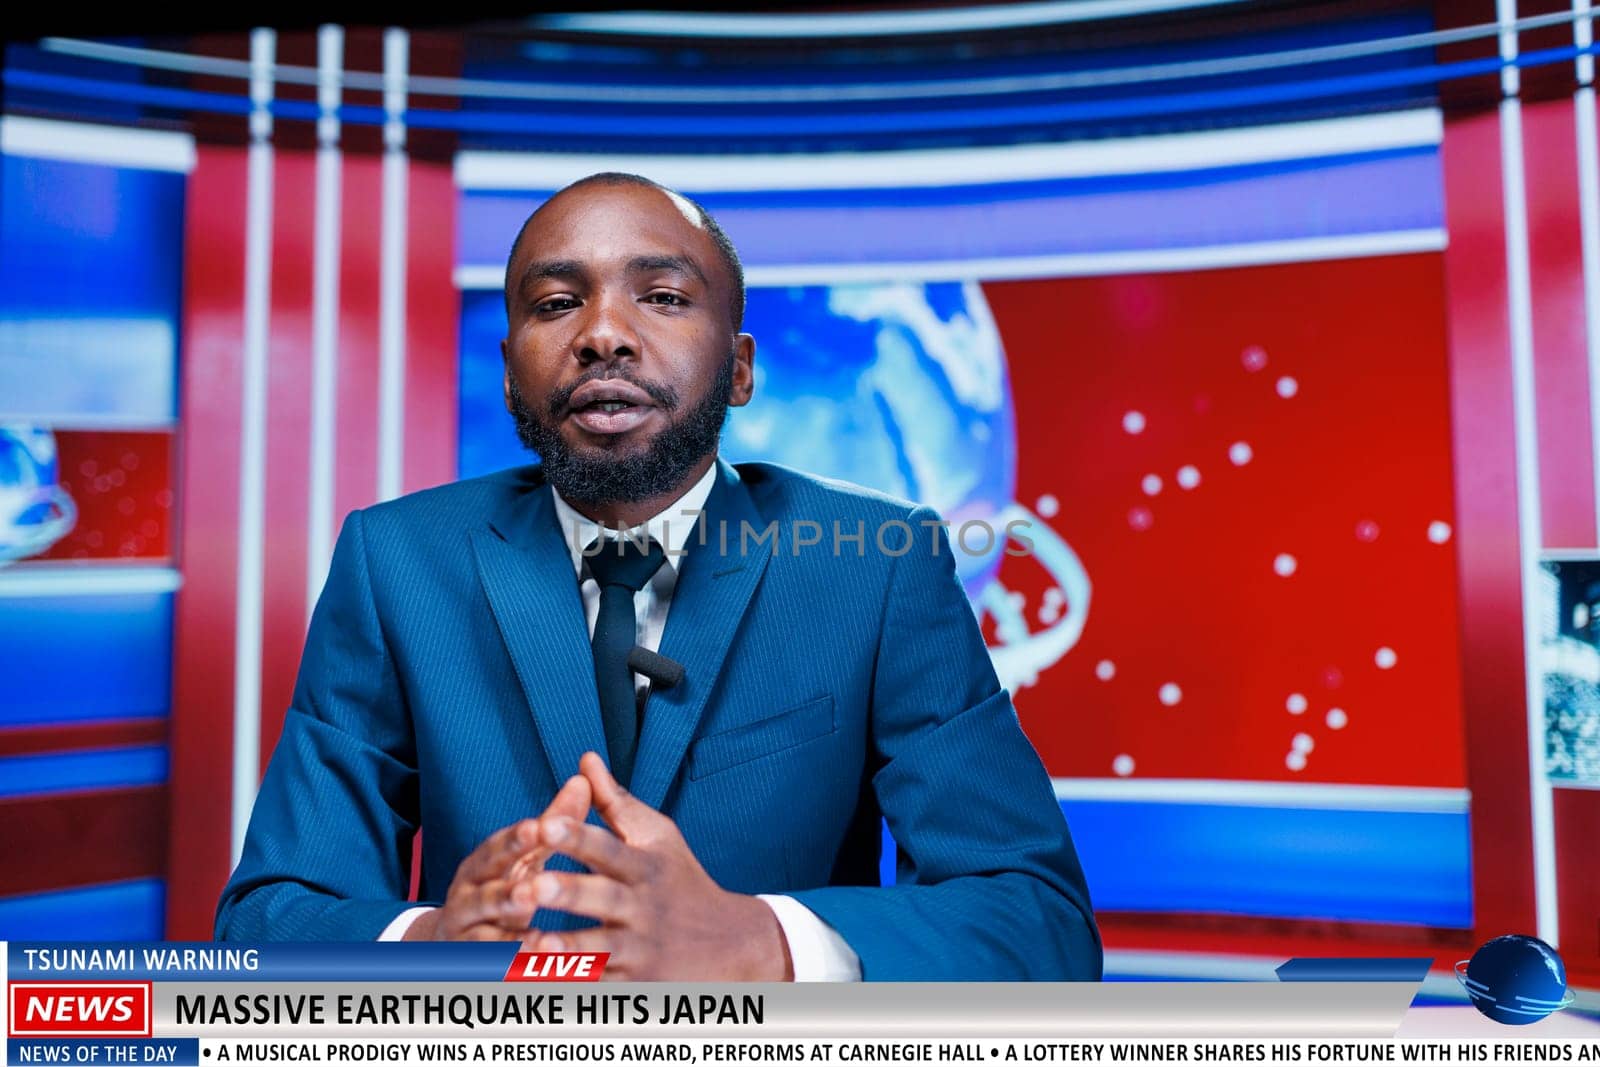 Broadcaster reveal earthquake news by DCStudio